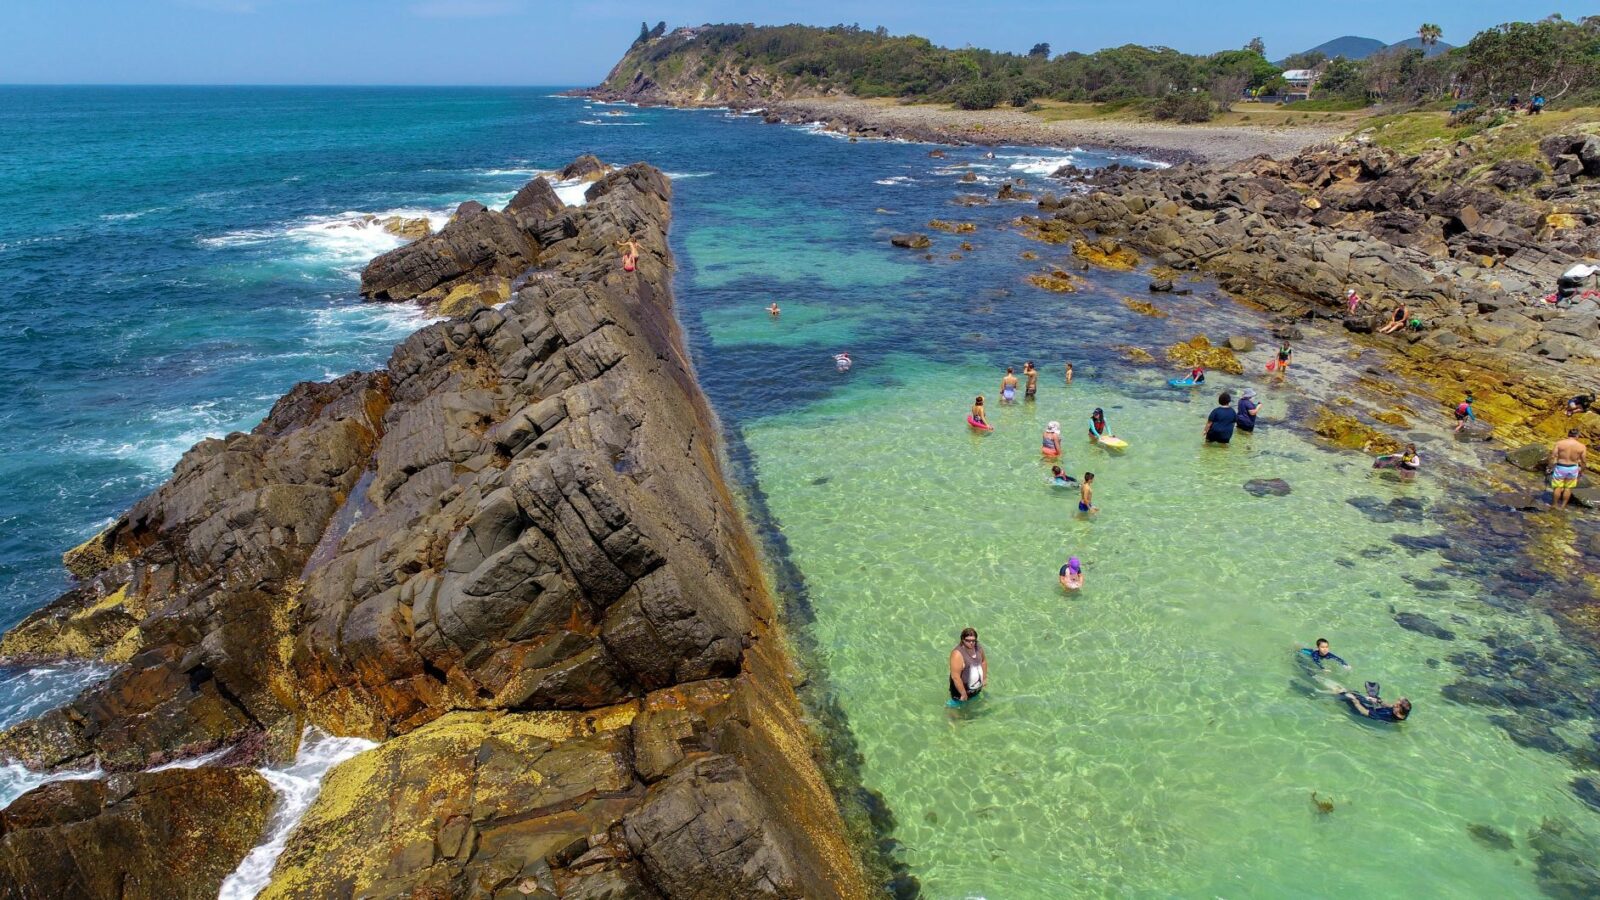 Swimming at The Tanks, Forster